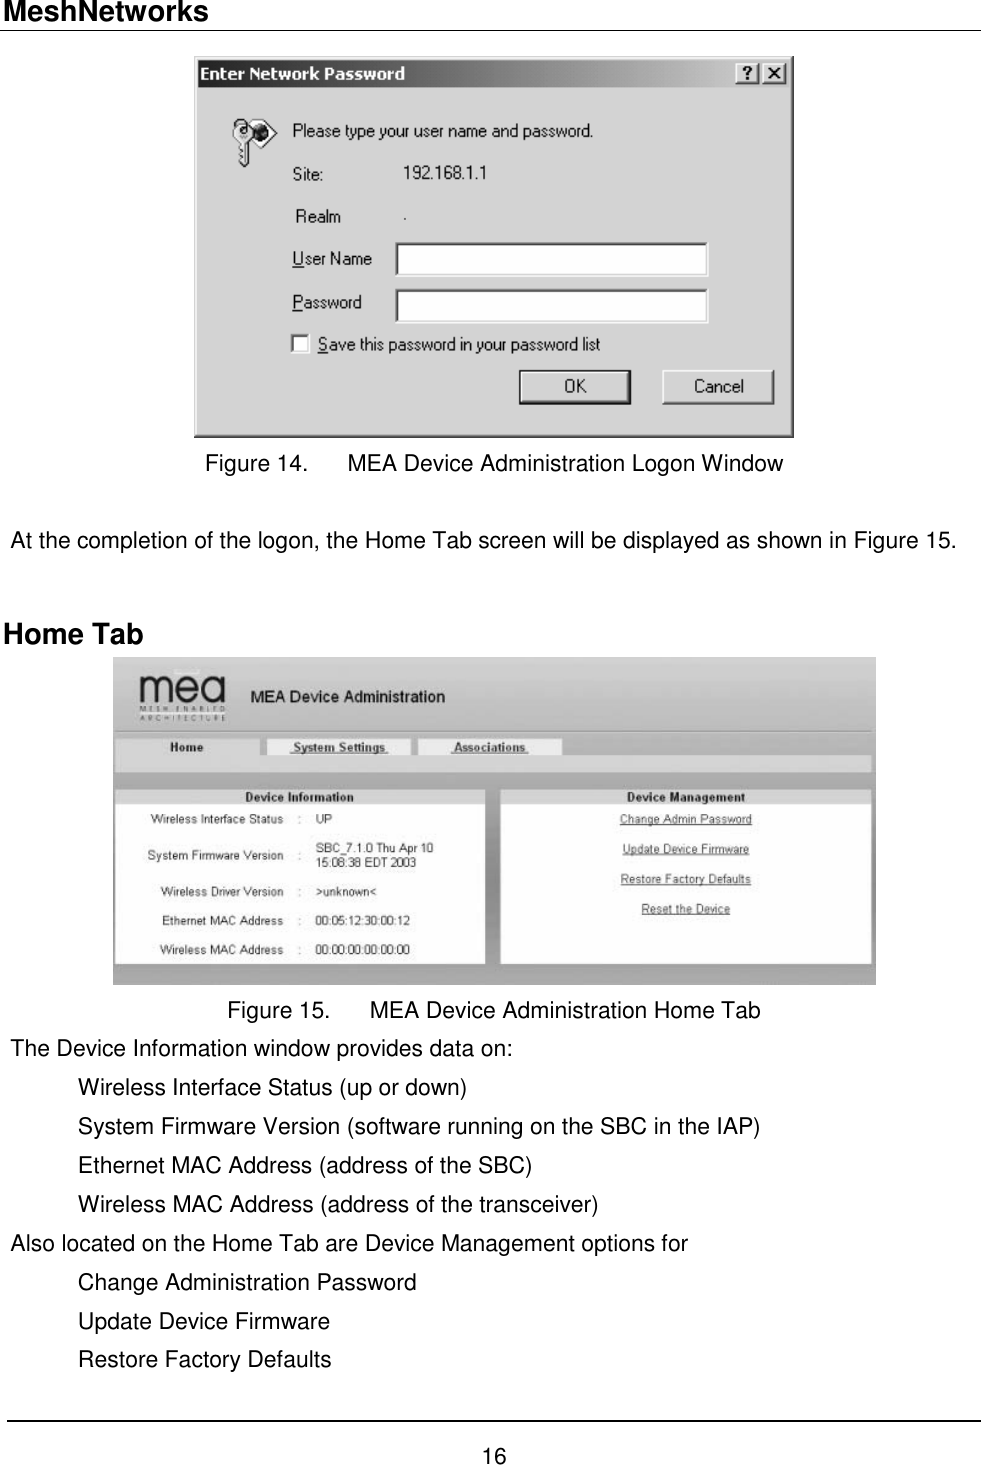 MeshNetworks 16  Figure 14.  MEA Device Administration Logon Window  At the completion of the logon, the Home Tab screen will be displayed as shown in Figure 15.  Home Tab  Figure 15.  MEA Device Administration Home Tab The Device Information window provides data on: Wireless Interface Status (up or down) System Firmware Version (software running on the SBC in the IAP) Ethernet MAC Address (address of the SBC) Wireless MAC Address (address of the transceiver) Also located on the Home Tab are Device Management options for  Change Administration Password Update Device Firmware Restore Factory Defaults 